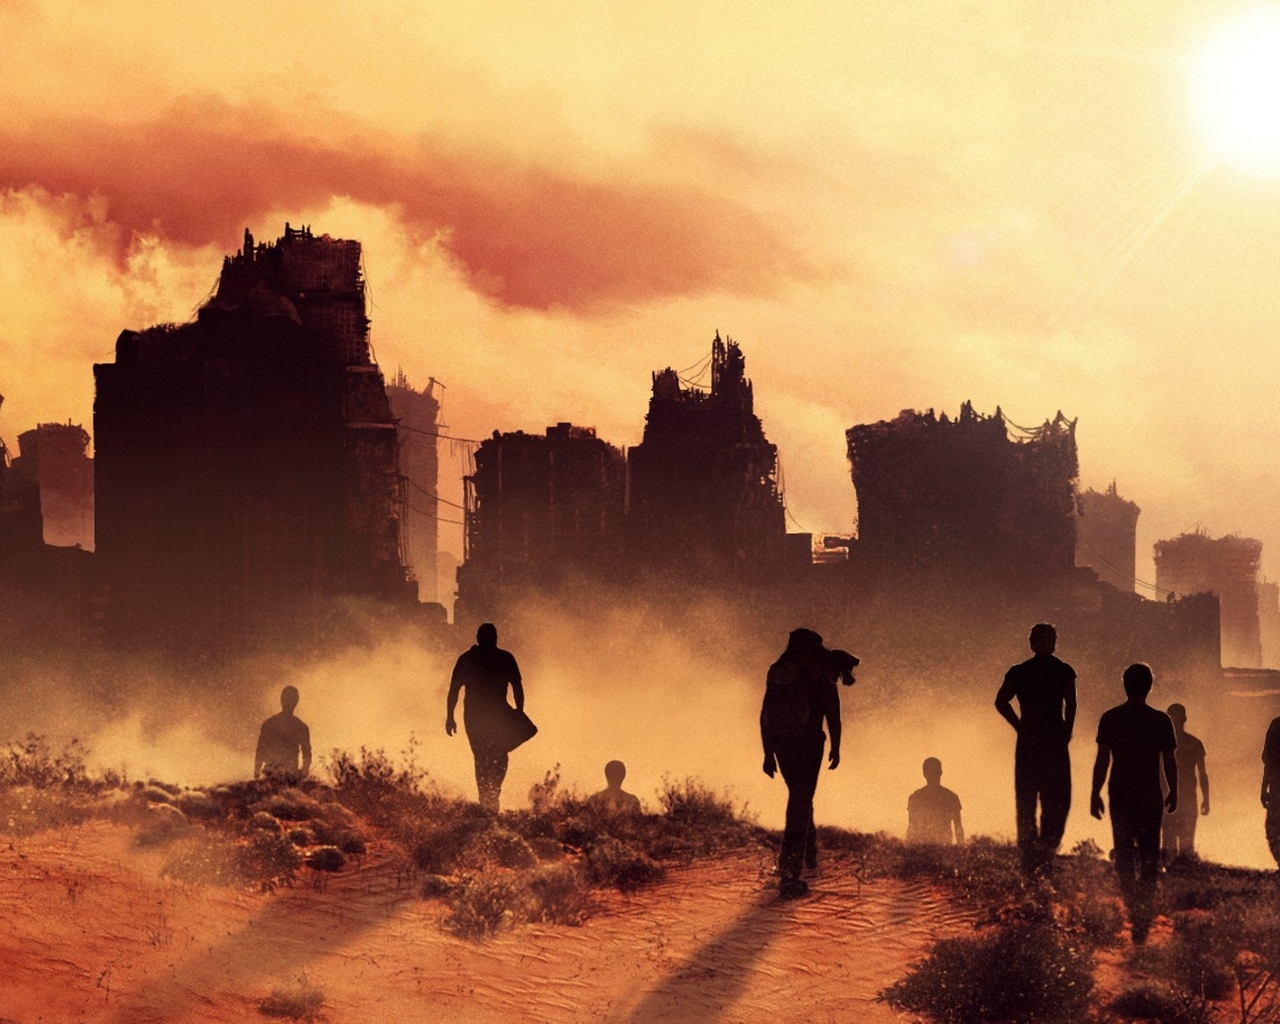 Maze Runner The Scorch Trials Silhouettes for 1280 x 1024 resolution